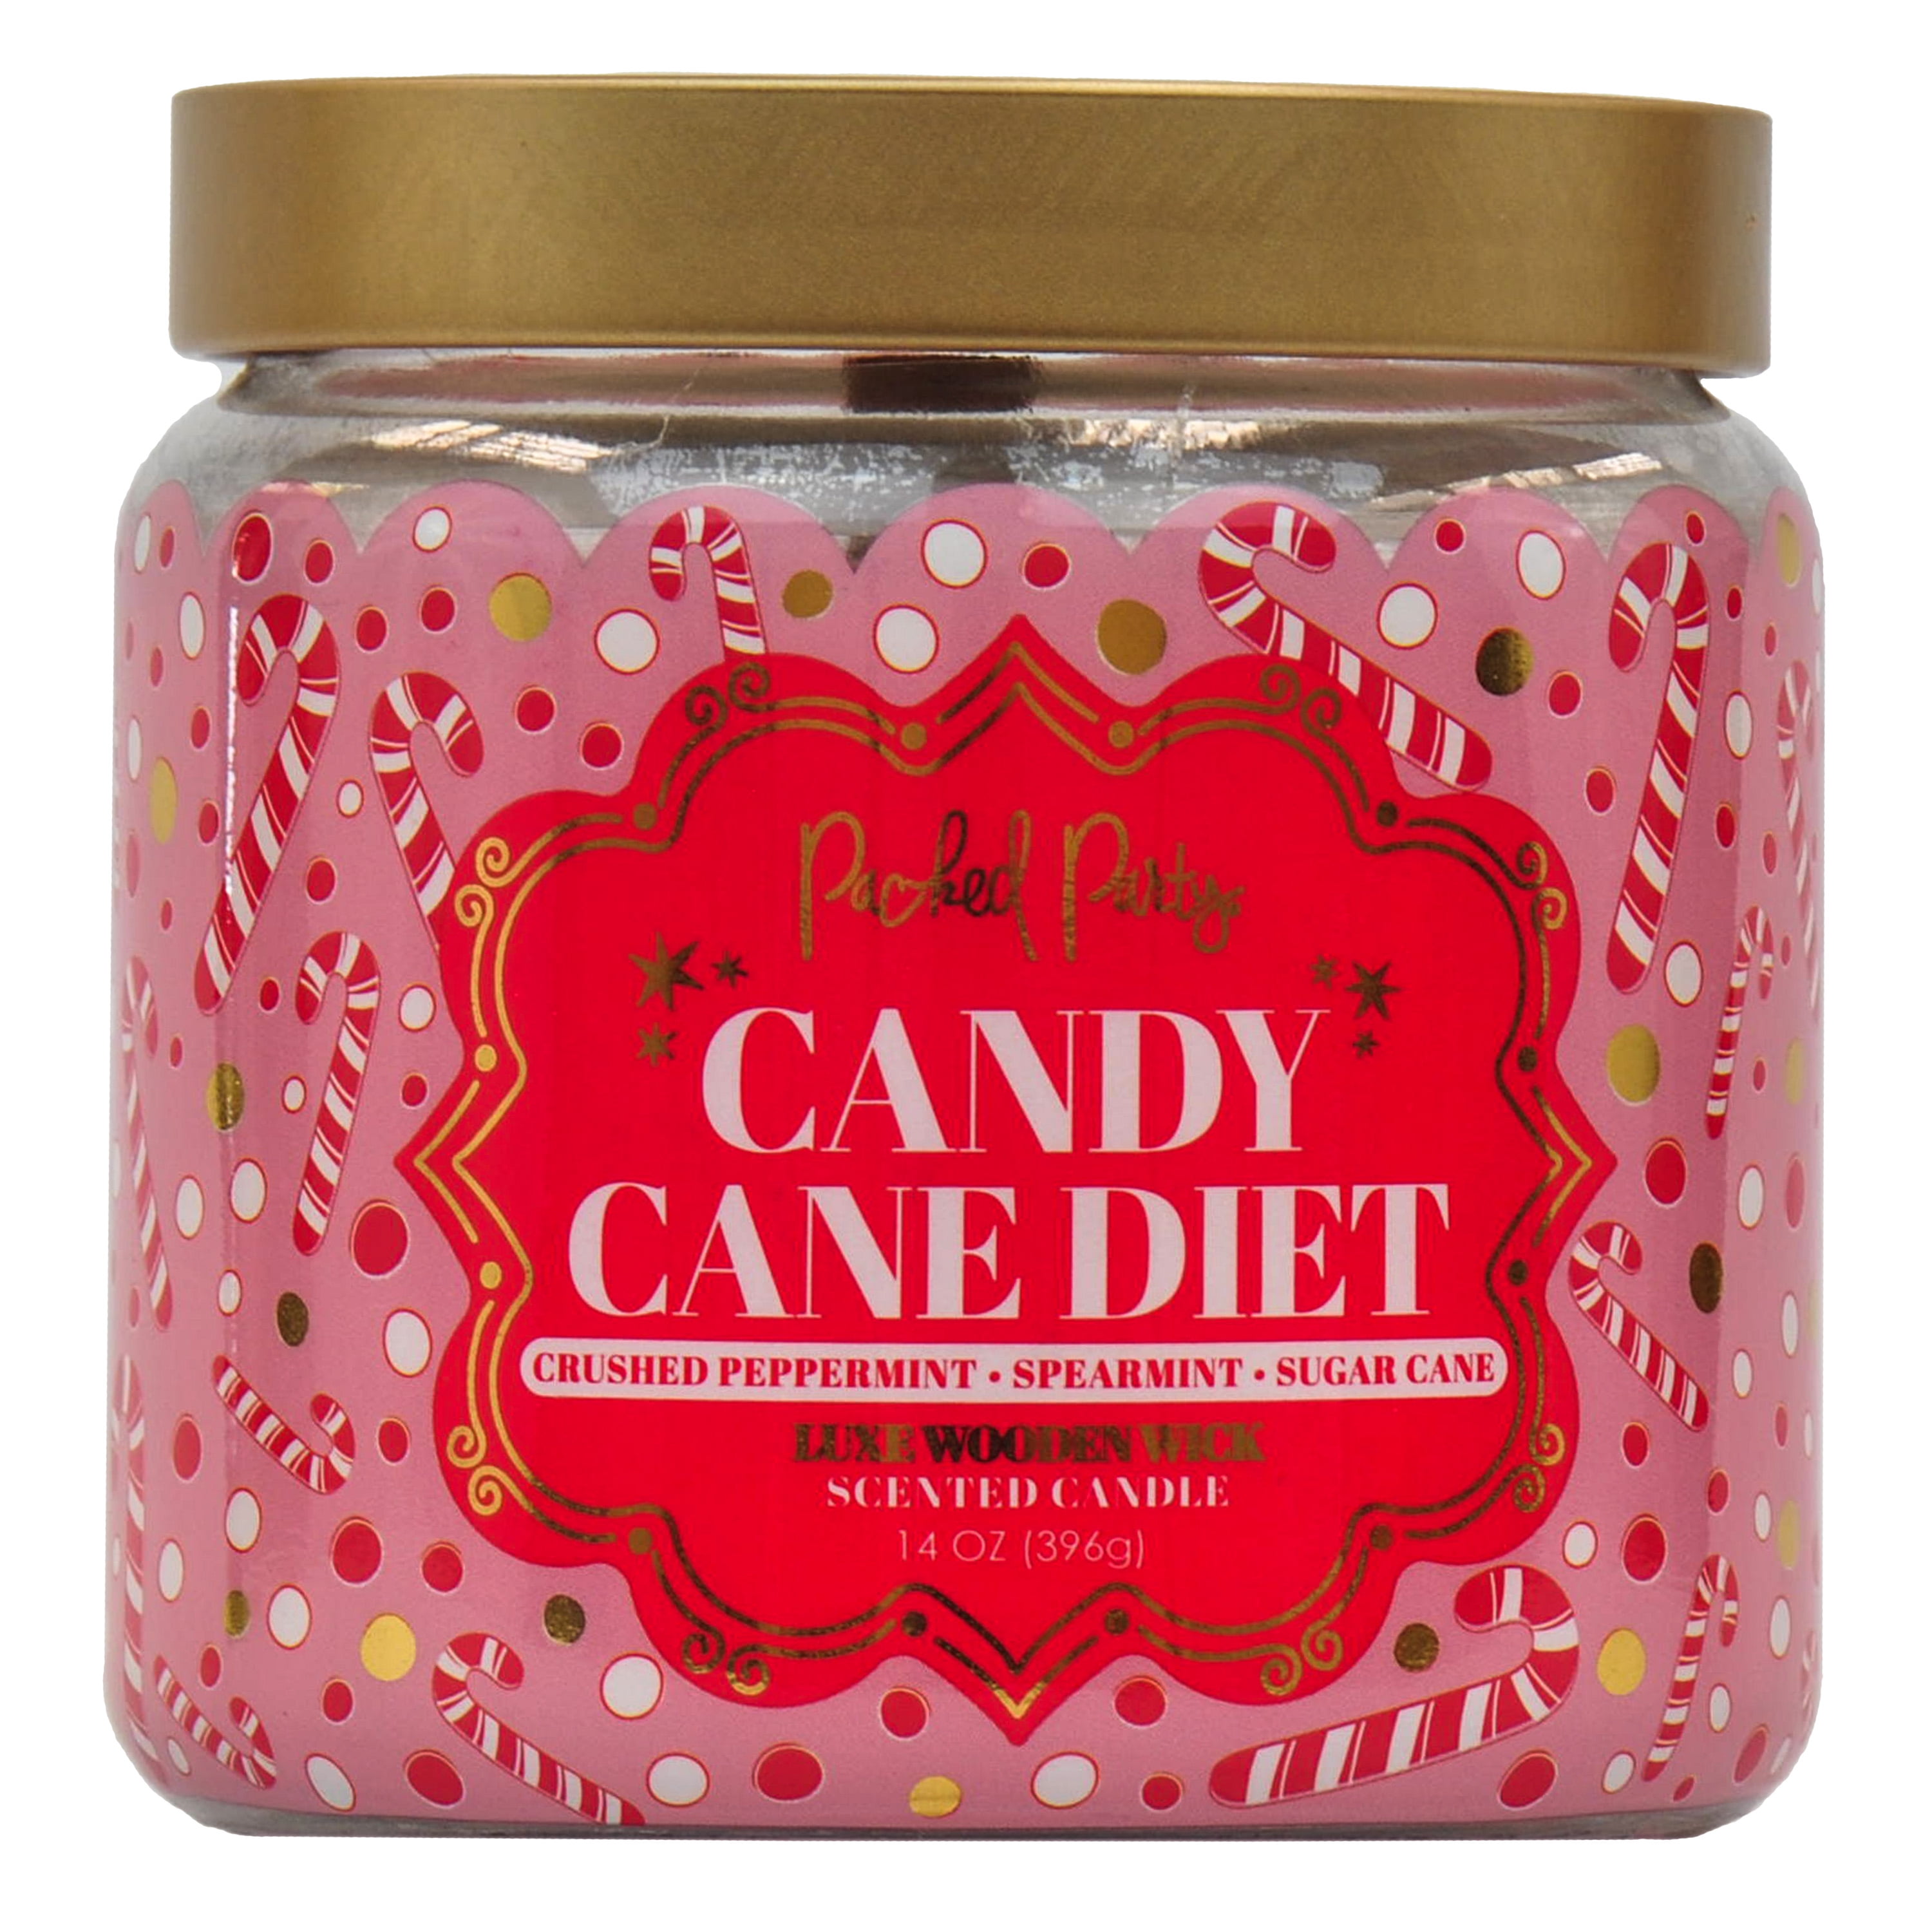 Packed Party Candy Cane Diet Wrapped candle with Wood Wick, 14-Ounce